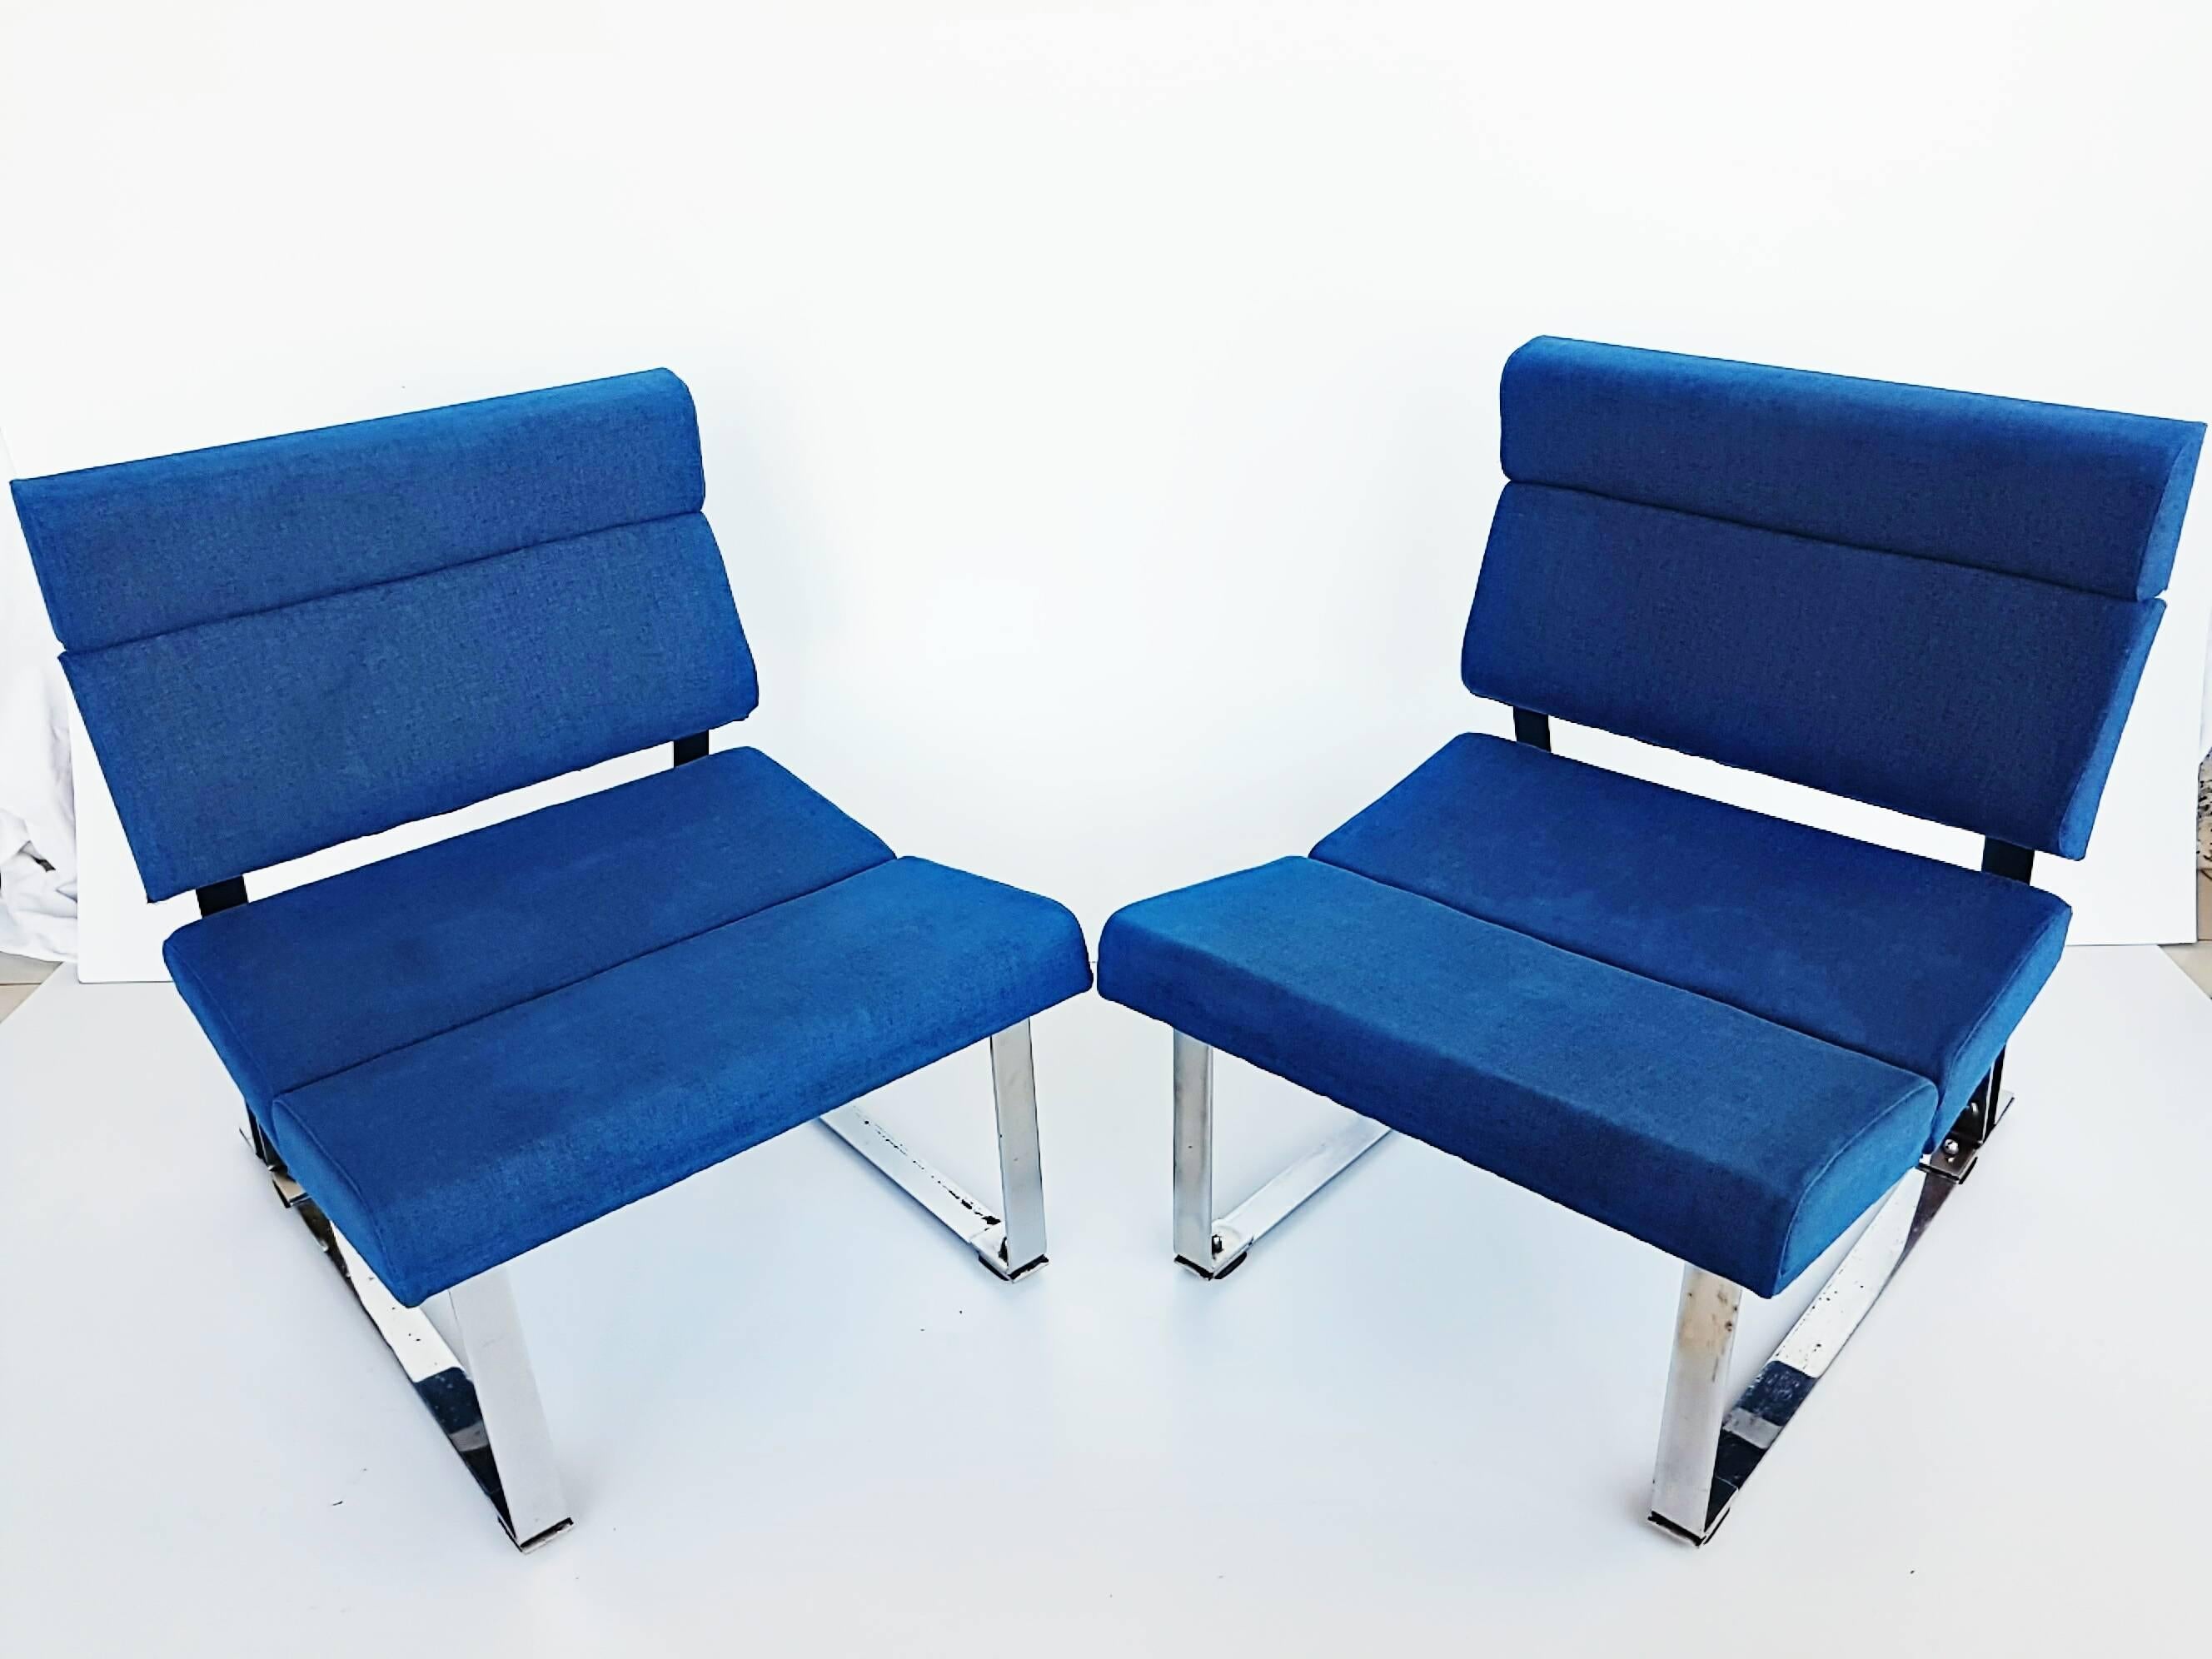 Rare and beautiful pair of armless by Vives Spain in 1970. Original blue oil fabric in perfect vintage condition, new foam. Architectural chrome metal structure.